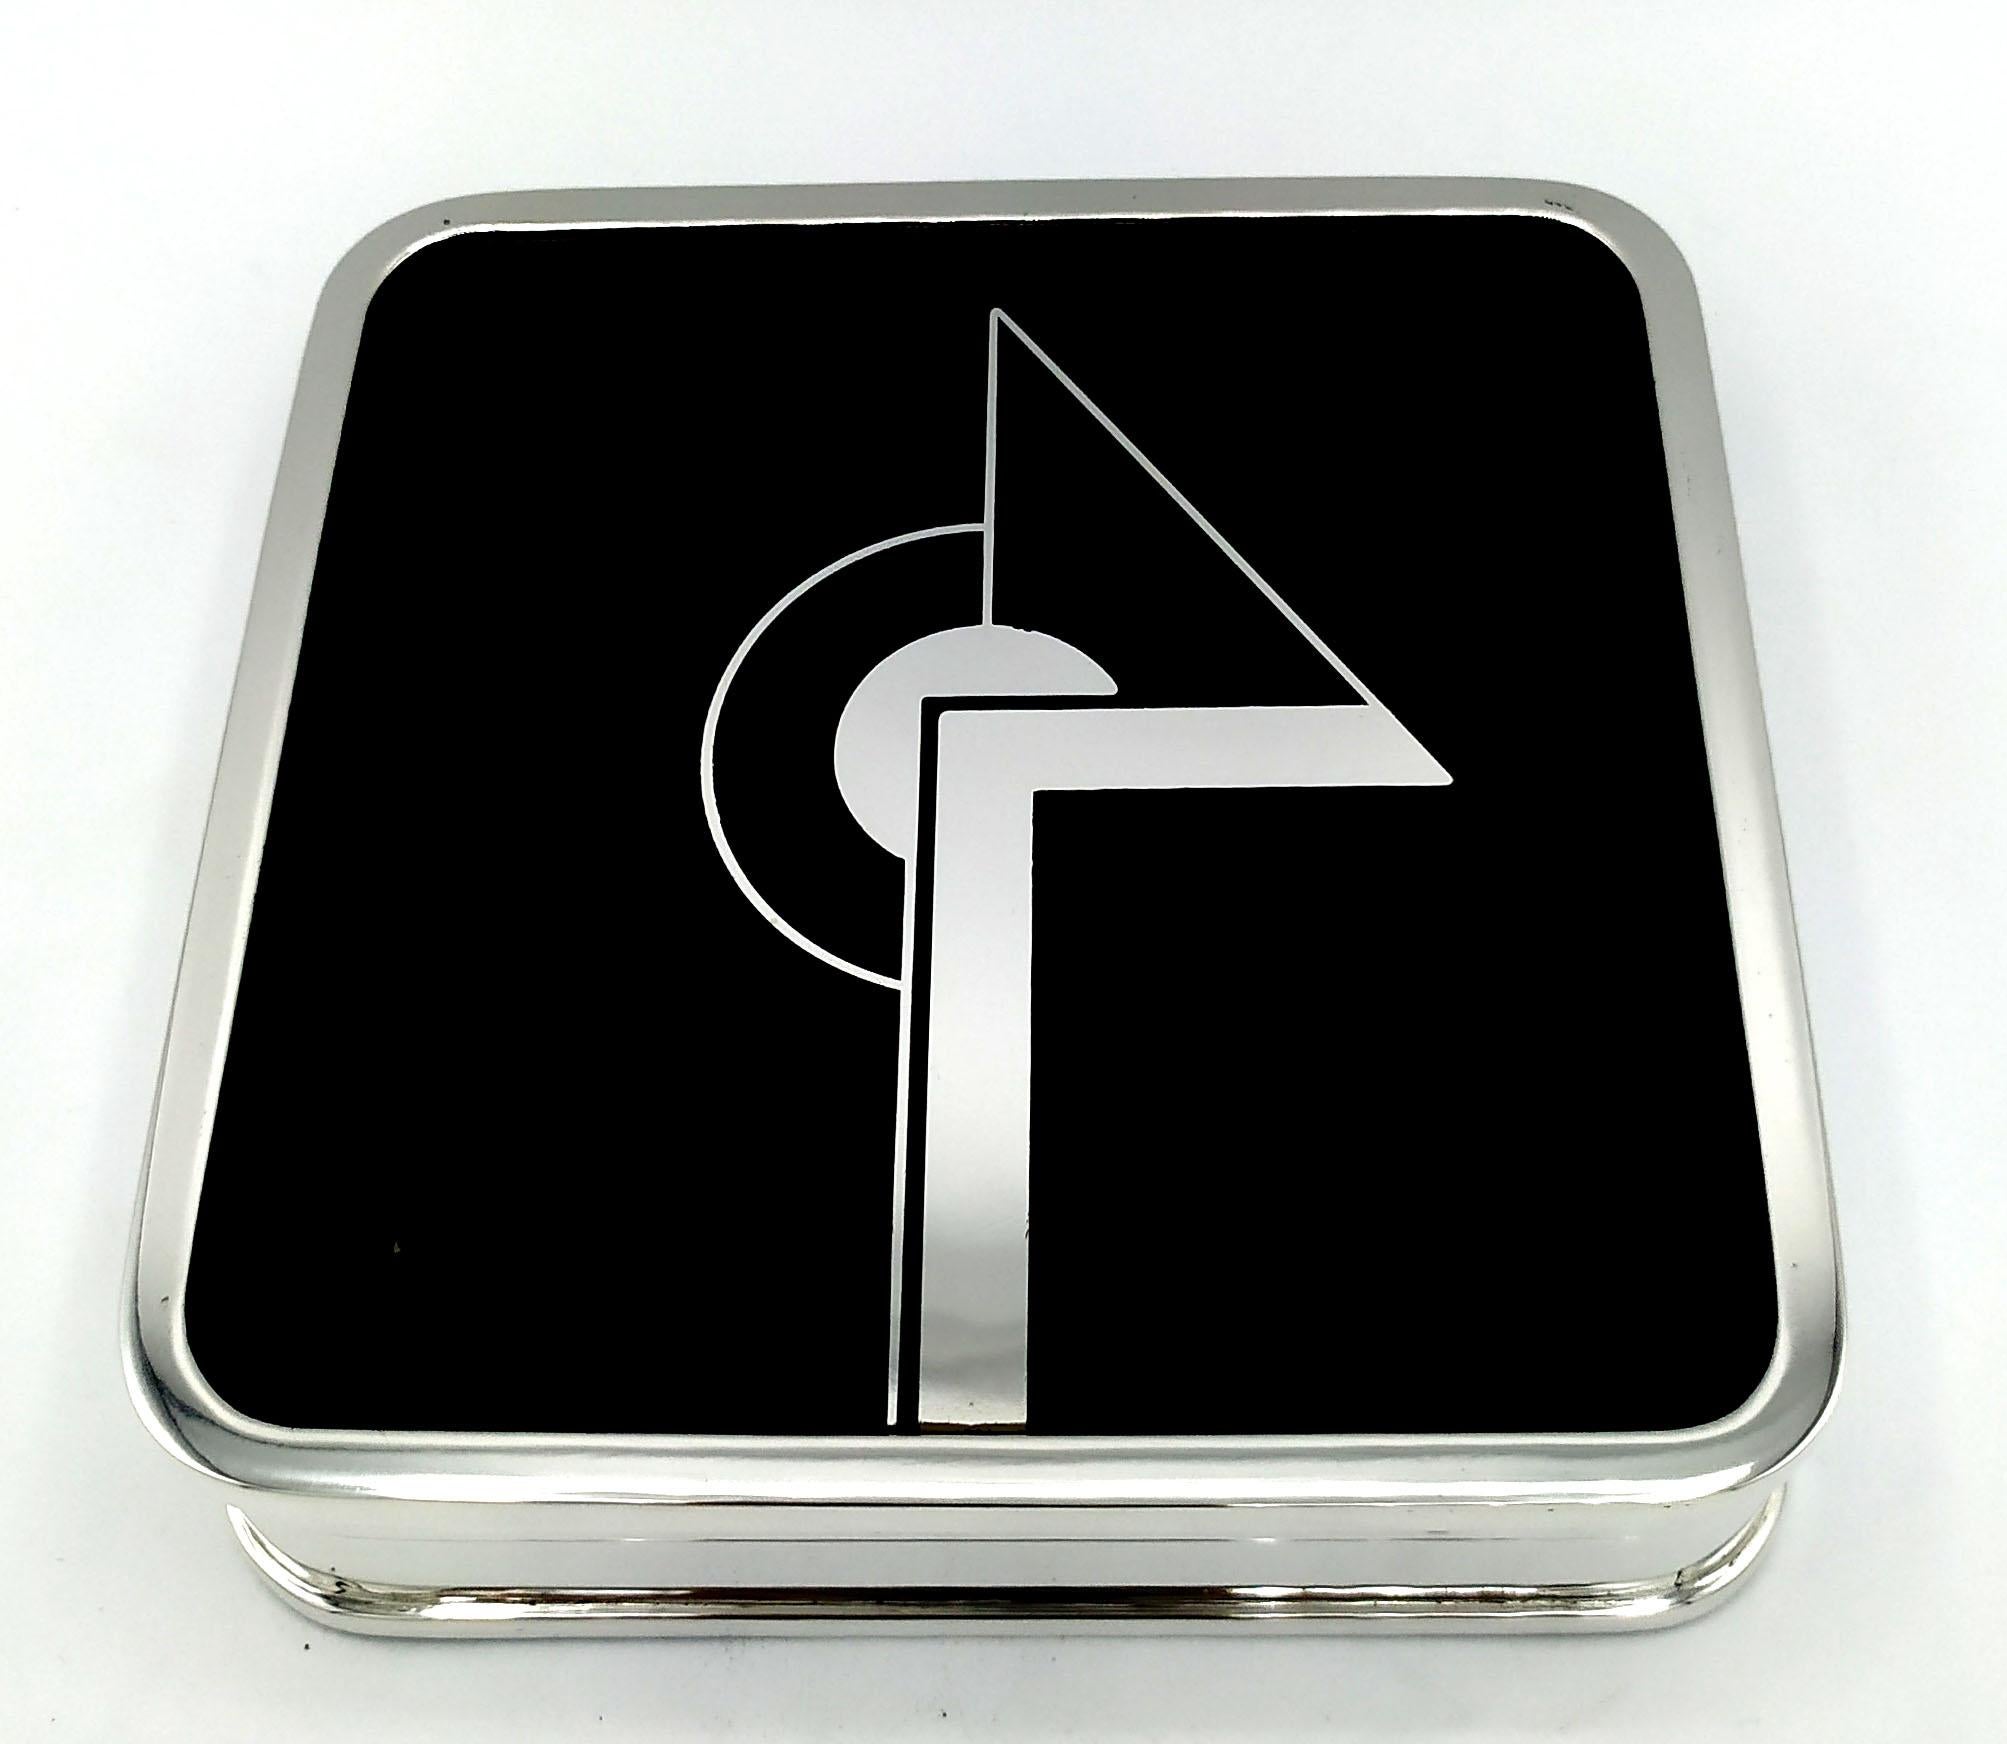 Square table box for cigarettes with rounded corners in 925/1000 sterling silver with black fired enamel. Measure cm. 12.7 x 12.7 x 3.2. Weight gr. 640. Created in the Art Deco style for Cartier USA in the 1980s, inspired by designs by Louis Cartier